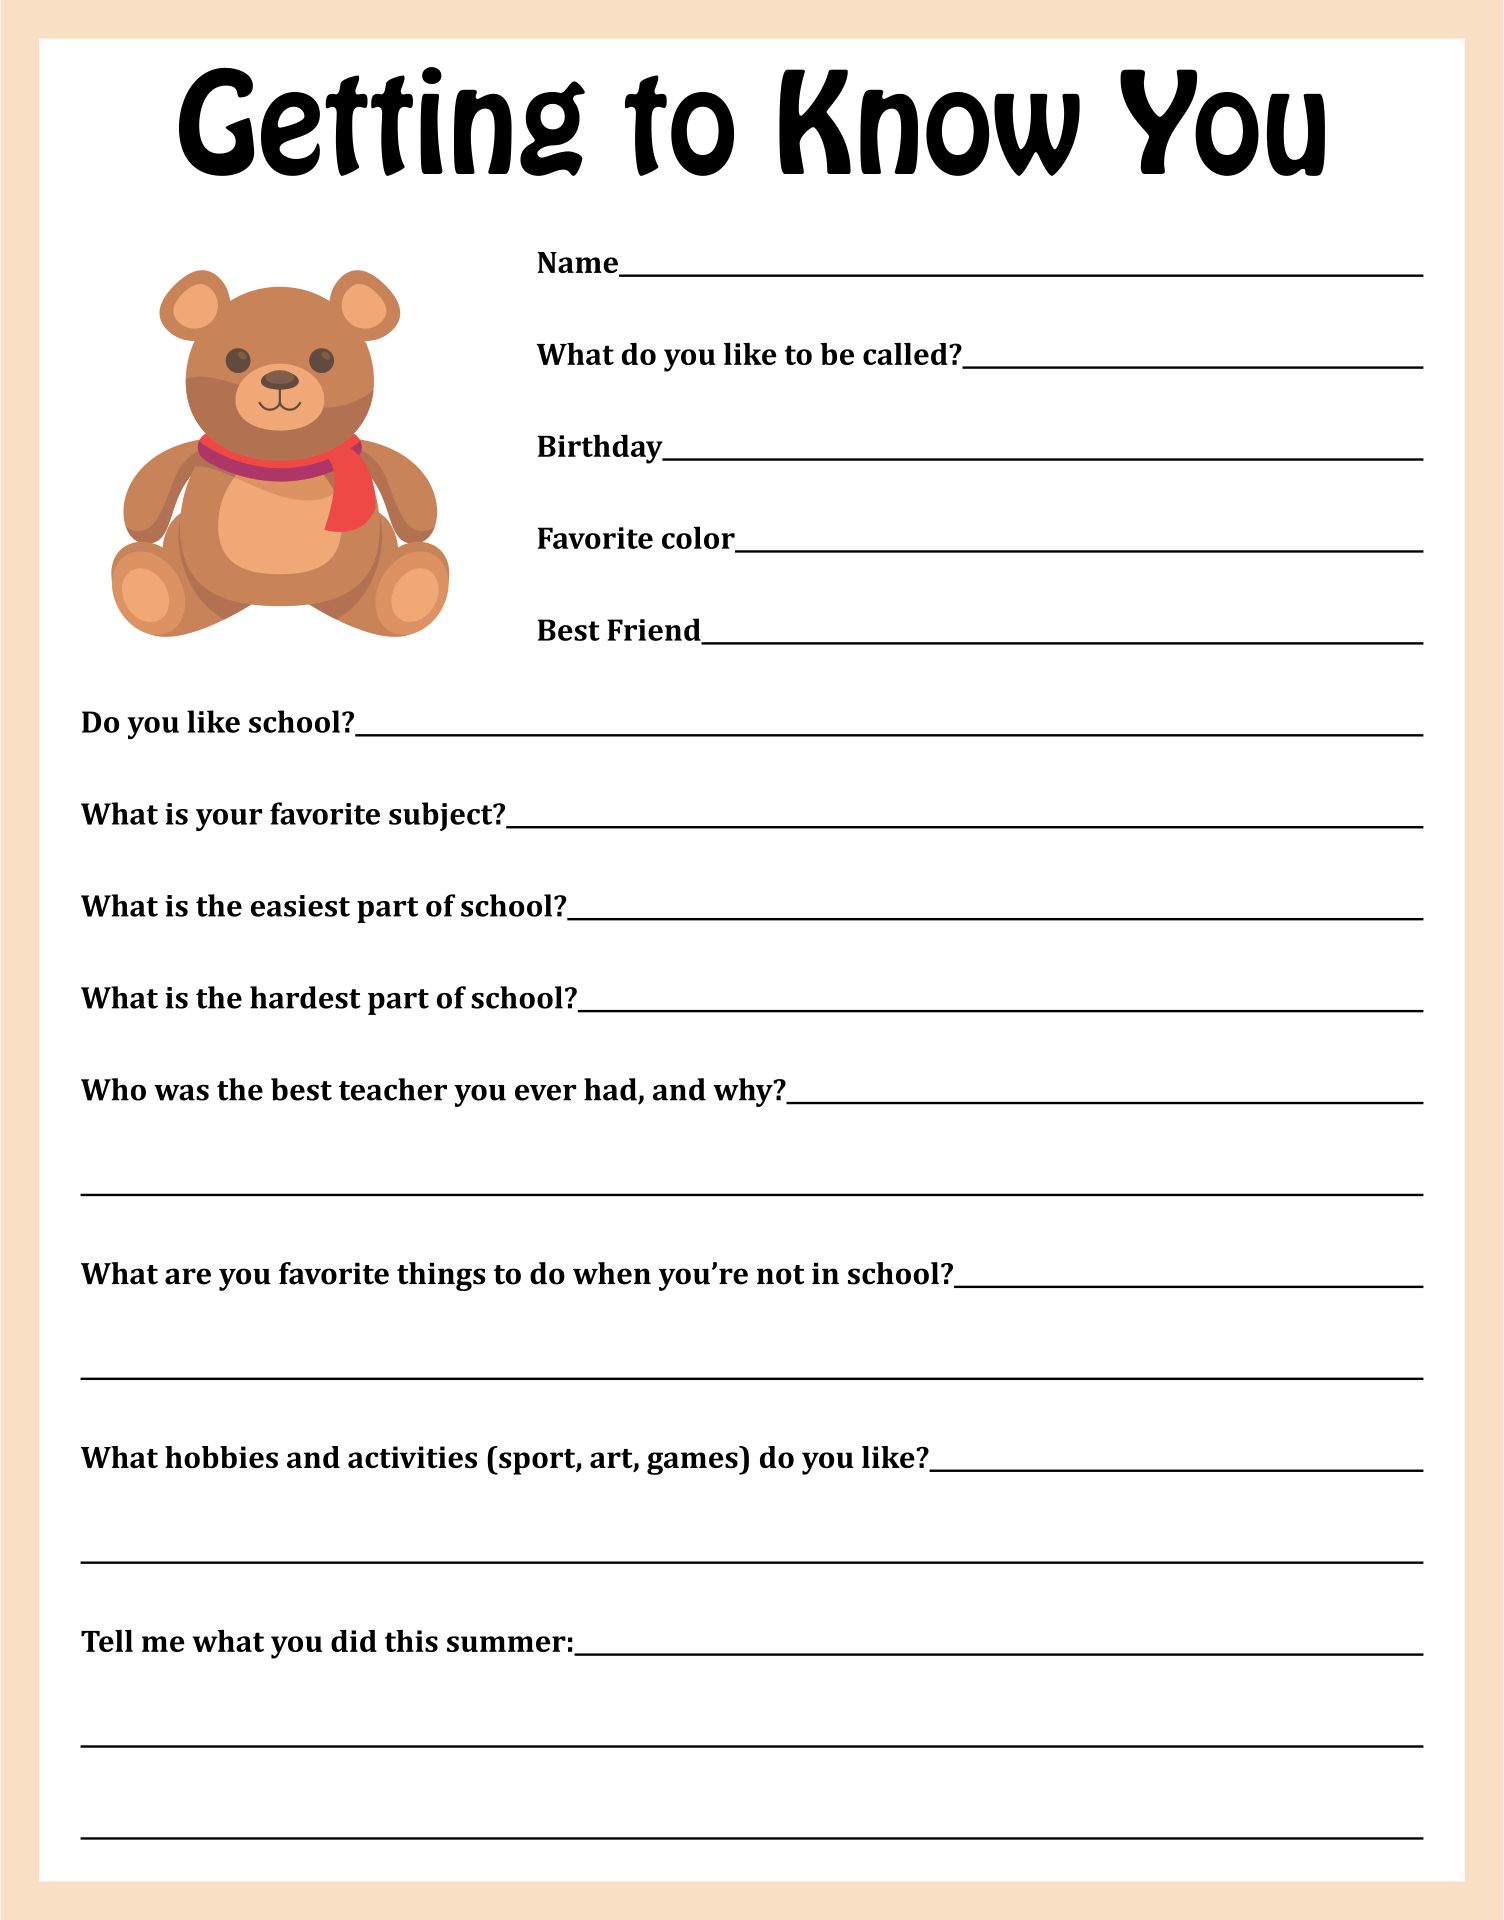 free-printable-get-to-know-you-worksheets